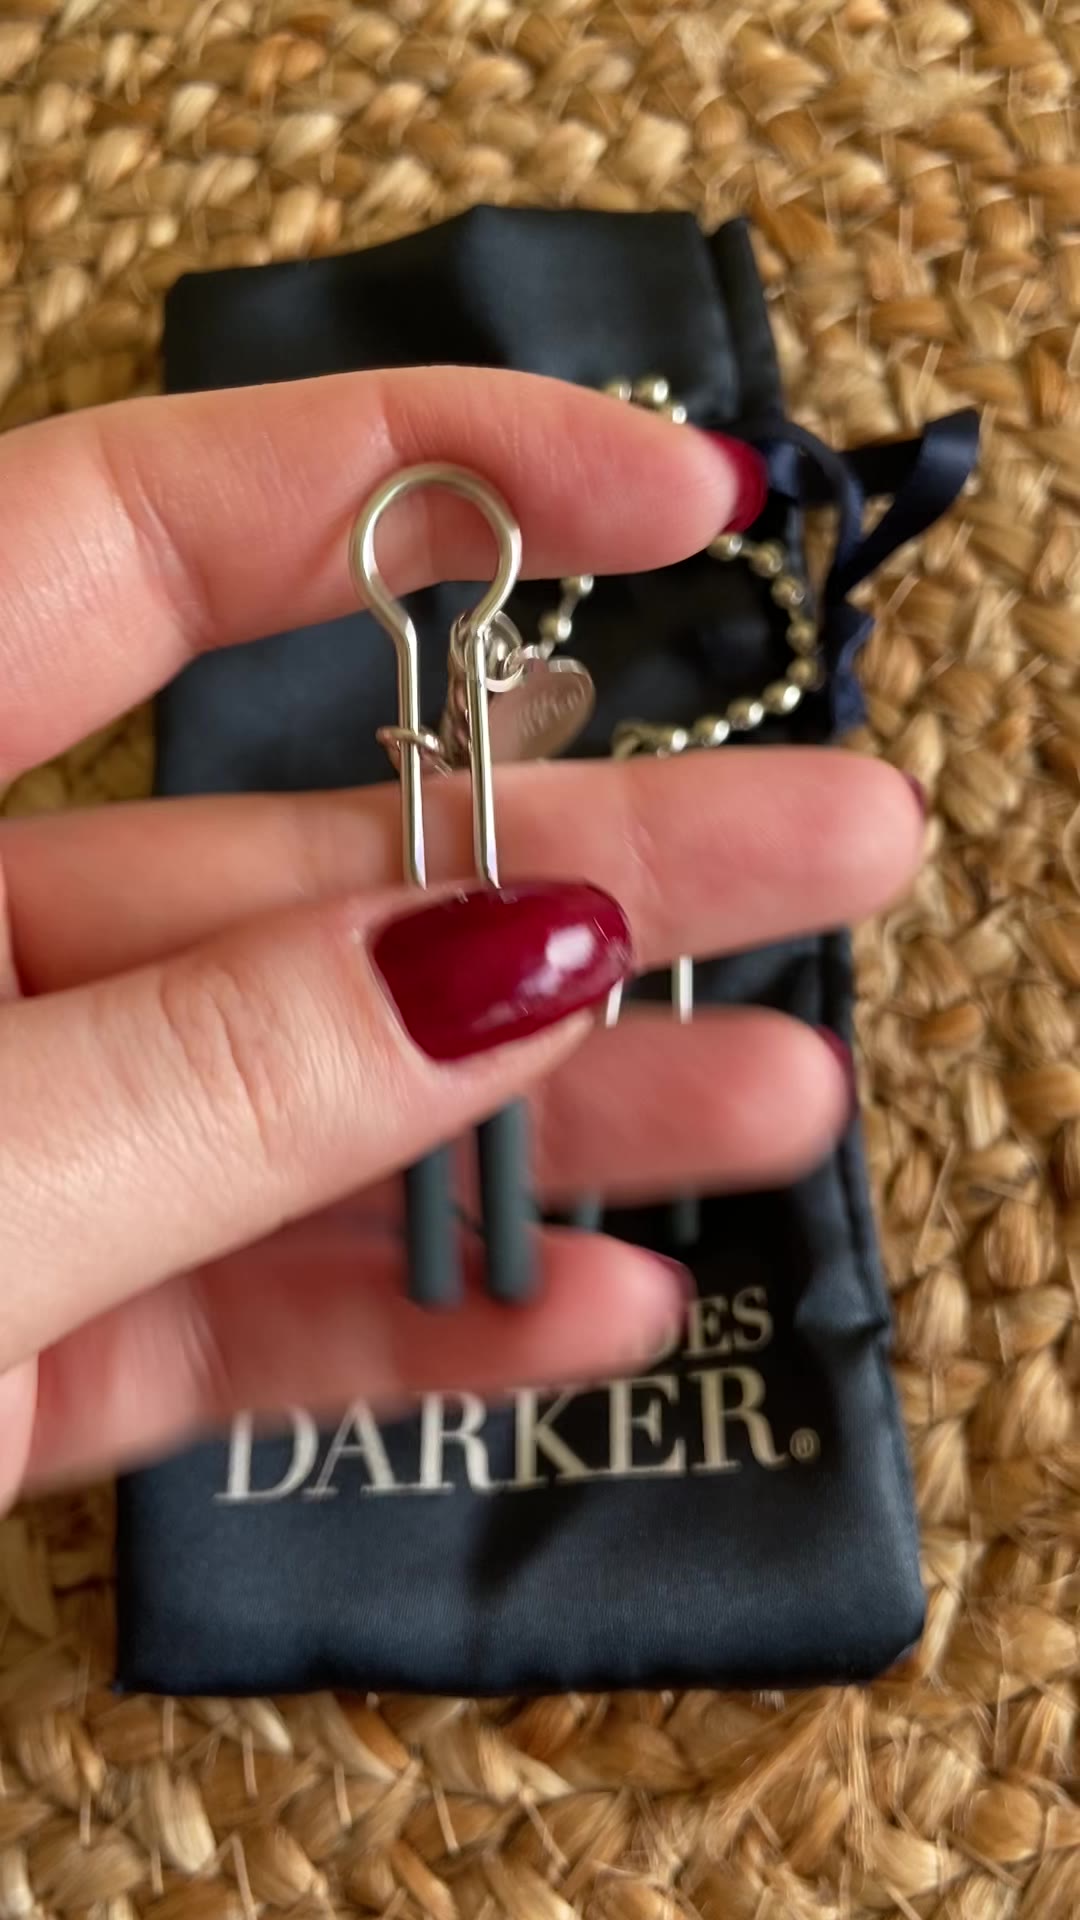 Fifty Shades Darker At My Mercy Chained Nipple Toys. Slide 2